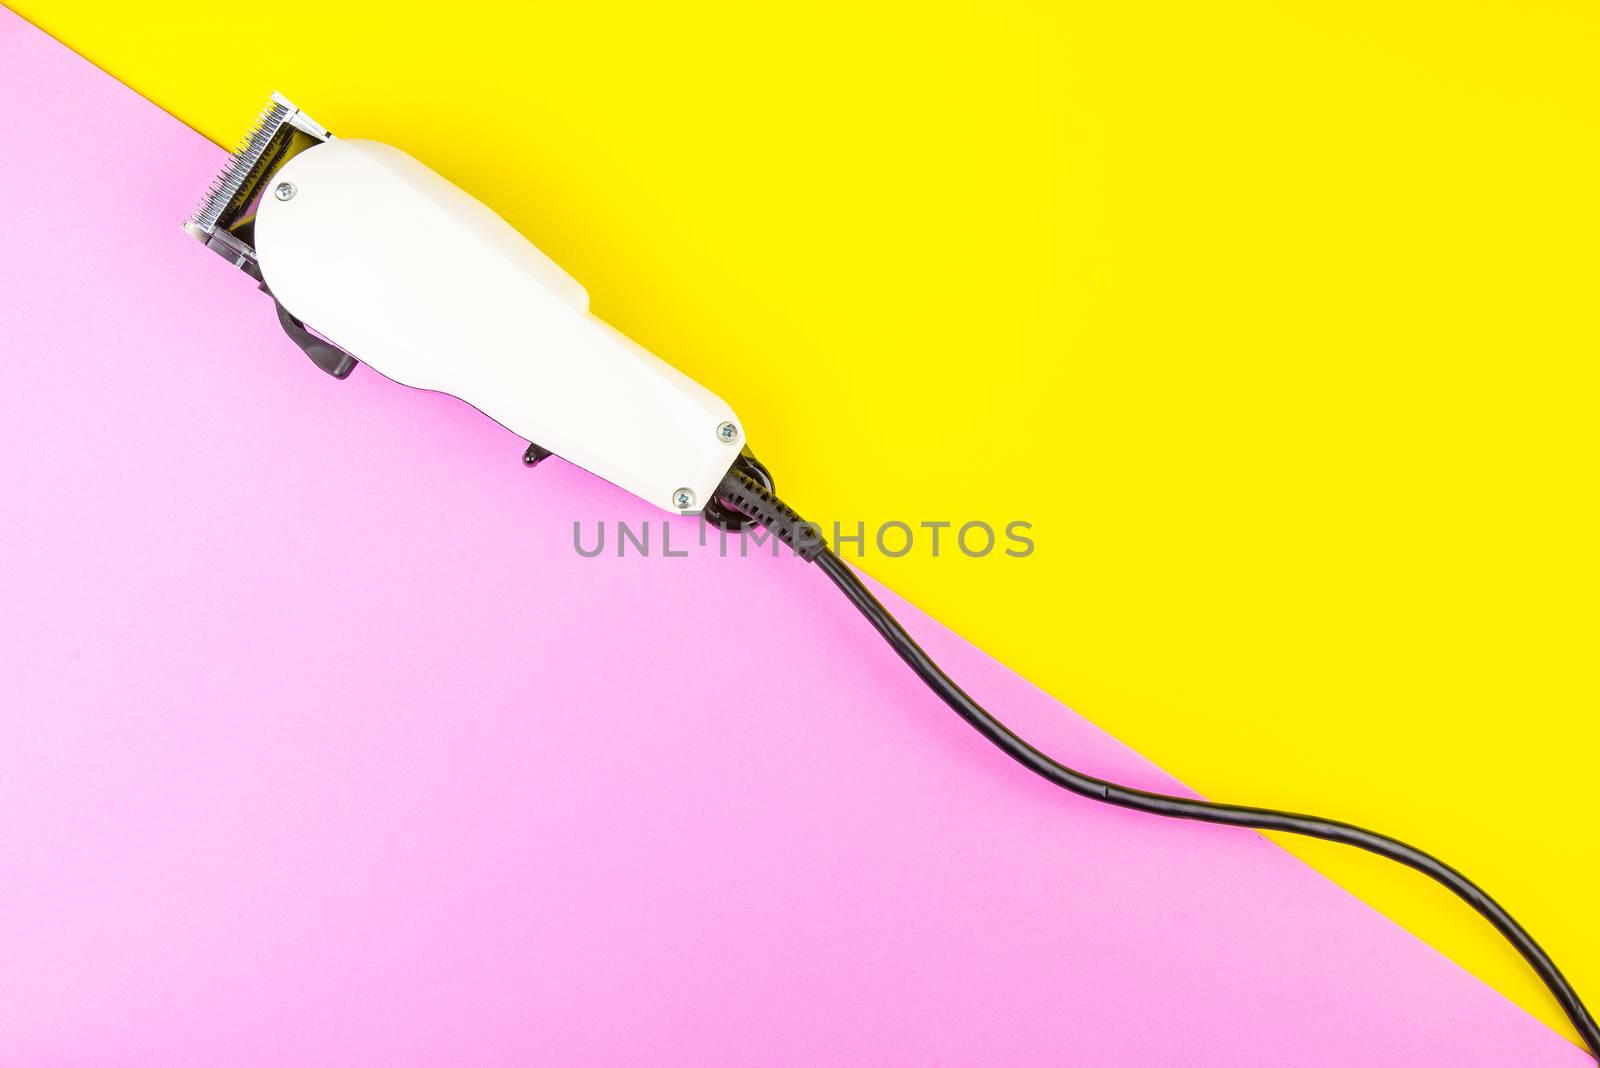 White electric clippers barber on yellow and pink background. Ha by Bubbers